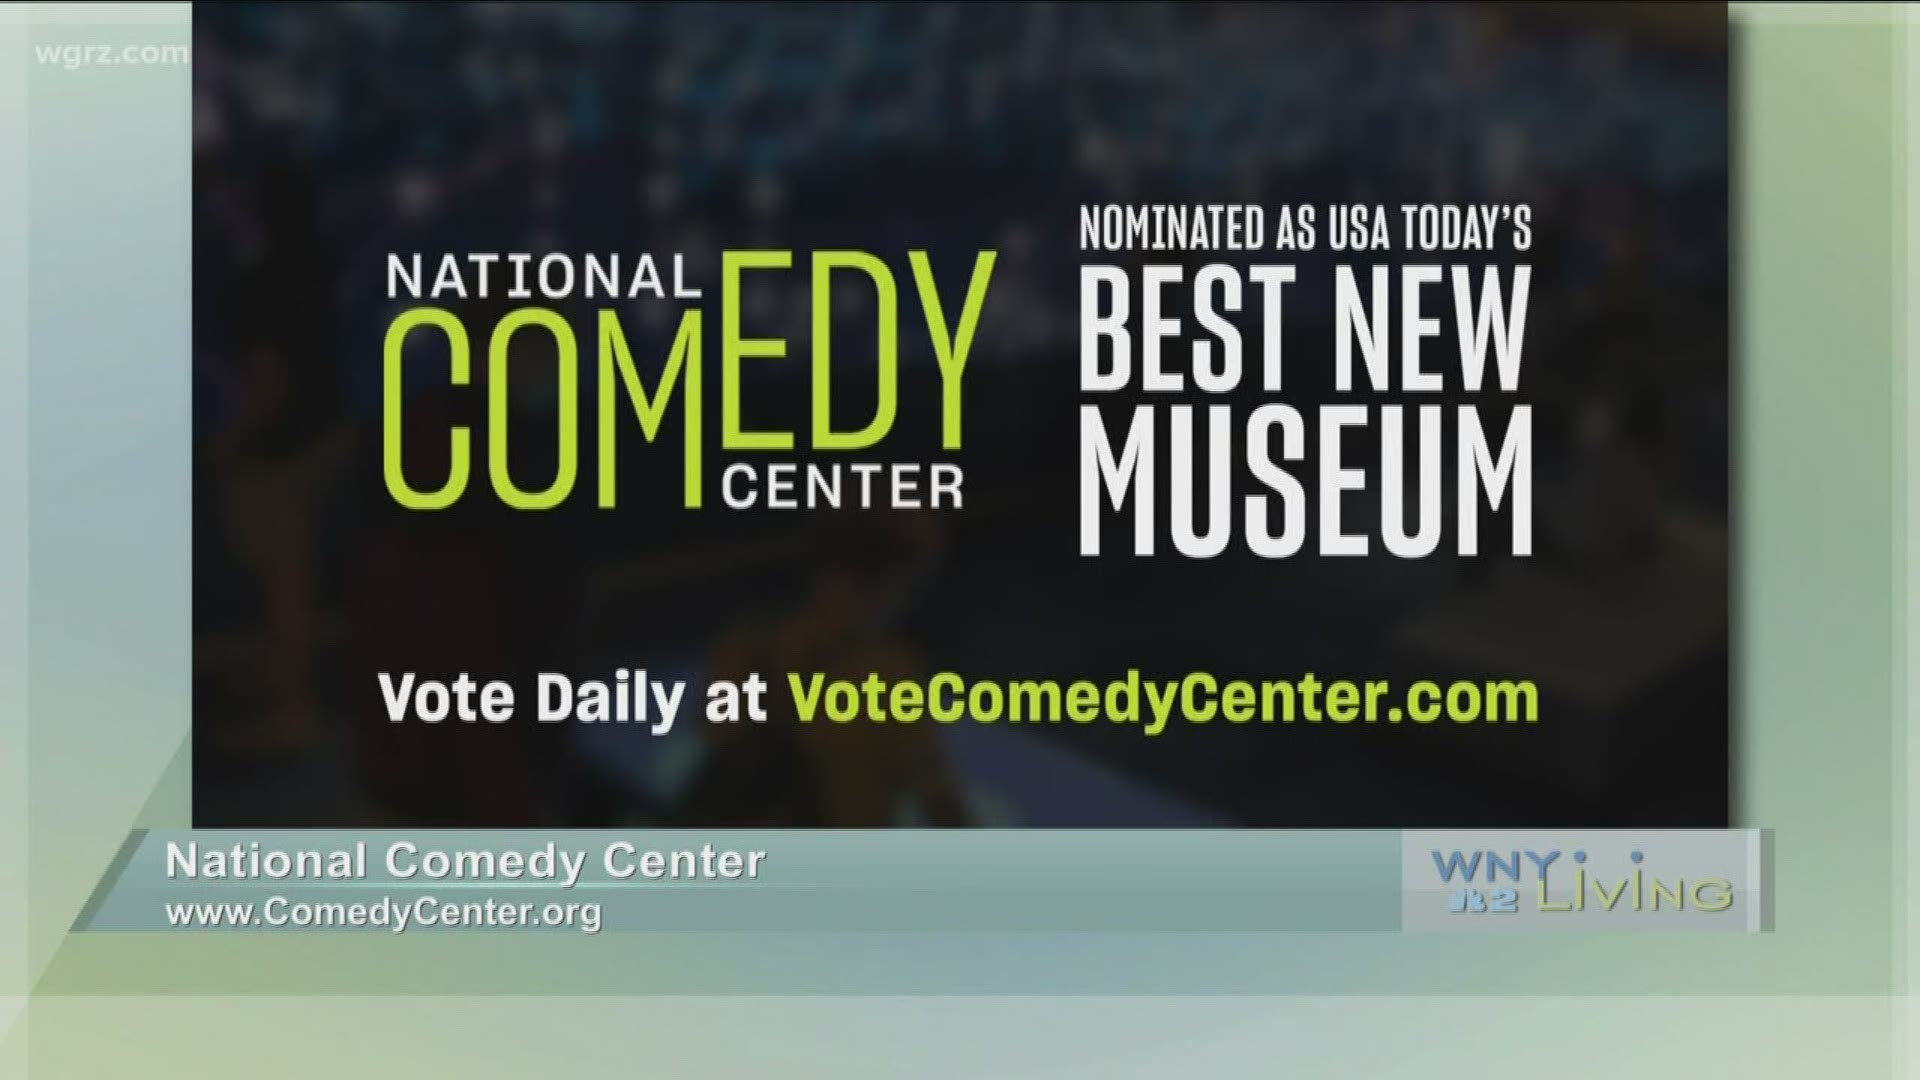 February 15 - National Comedy Center (THIS VIDEO IS SPONSORED BY NATIONAL COMEDY CENTER)